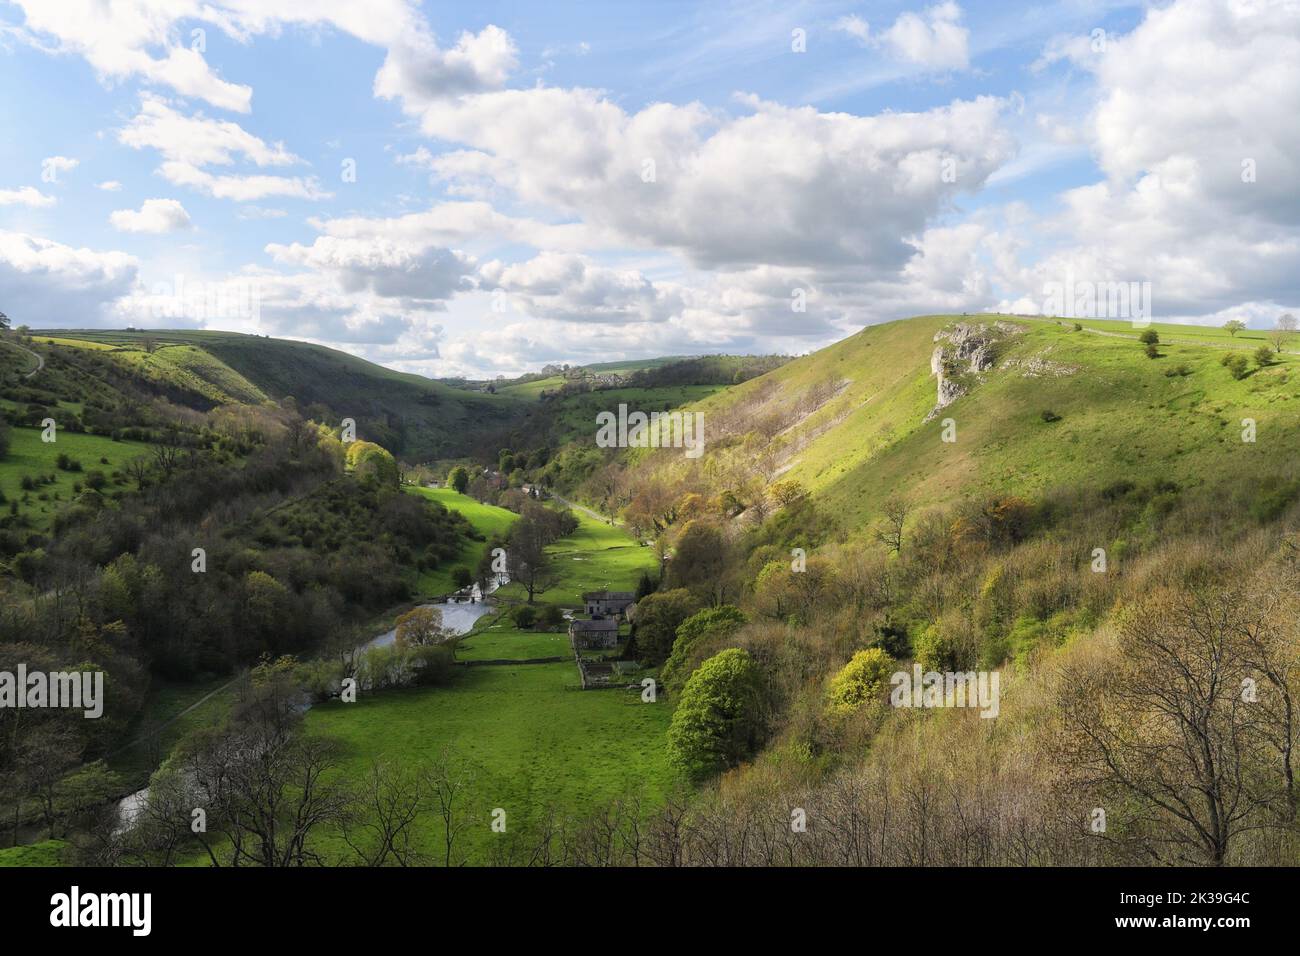 Scenic and picturesque Monsal Dale in the Peak District in Derbyshire, England UK. Rural British countryside. River Wye Valley. lush green hillside Stock Photo